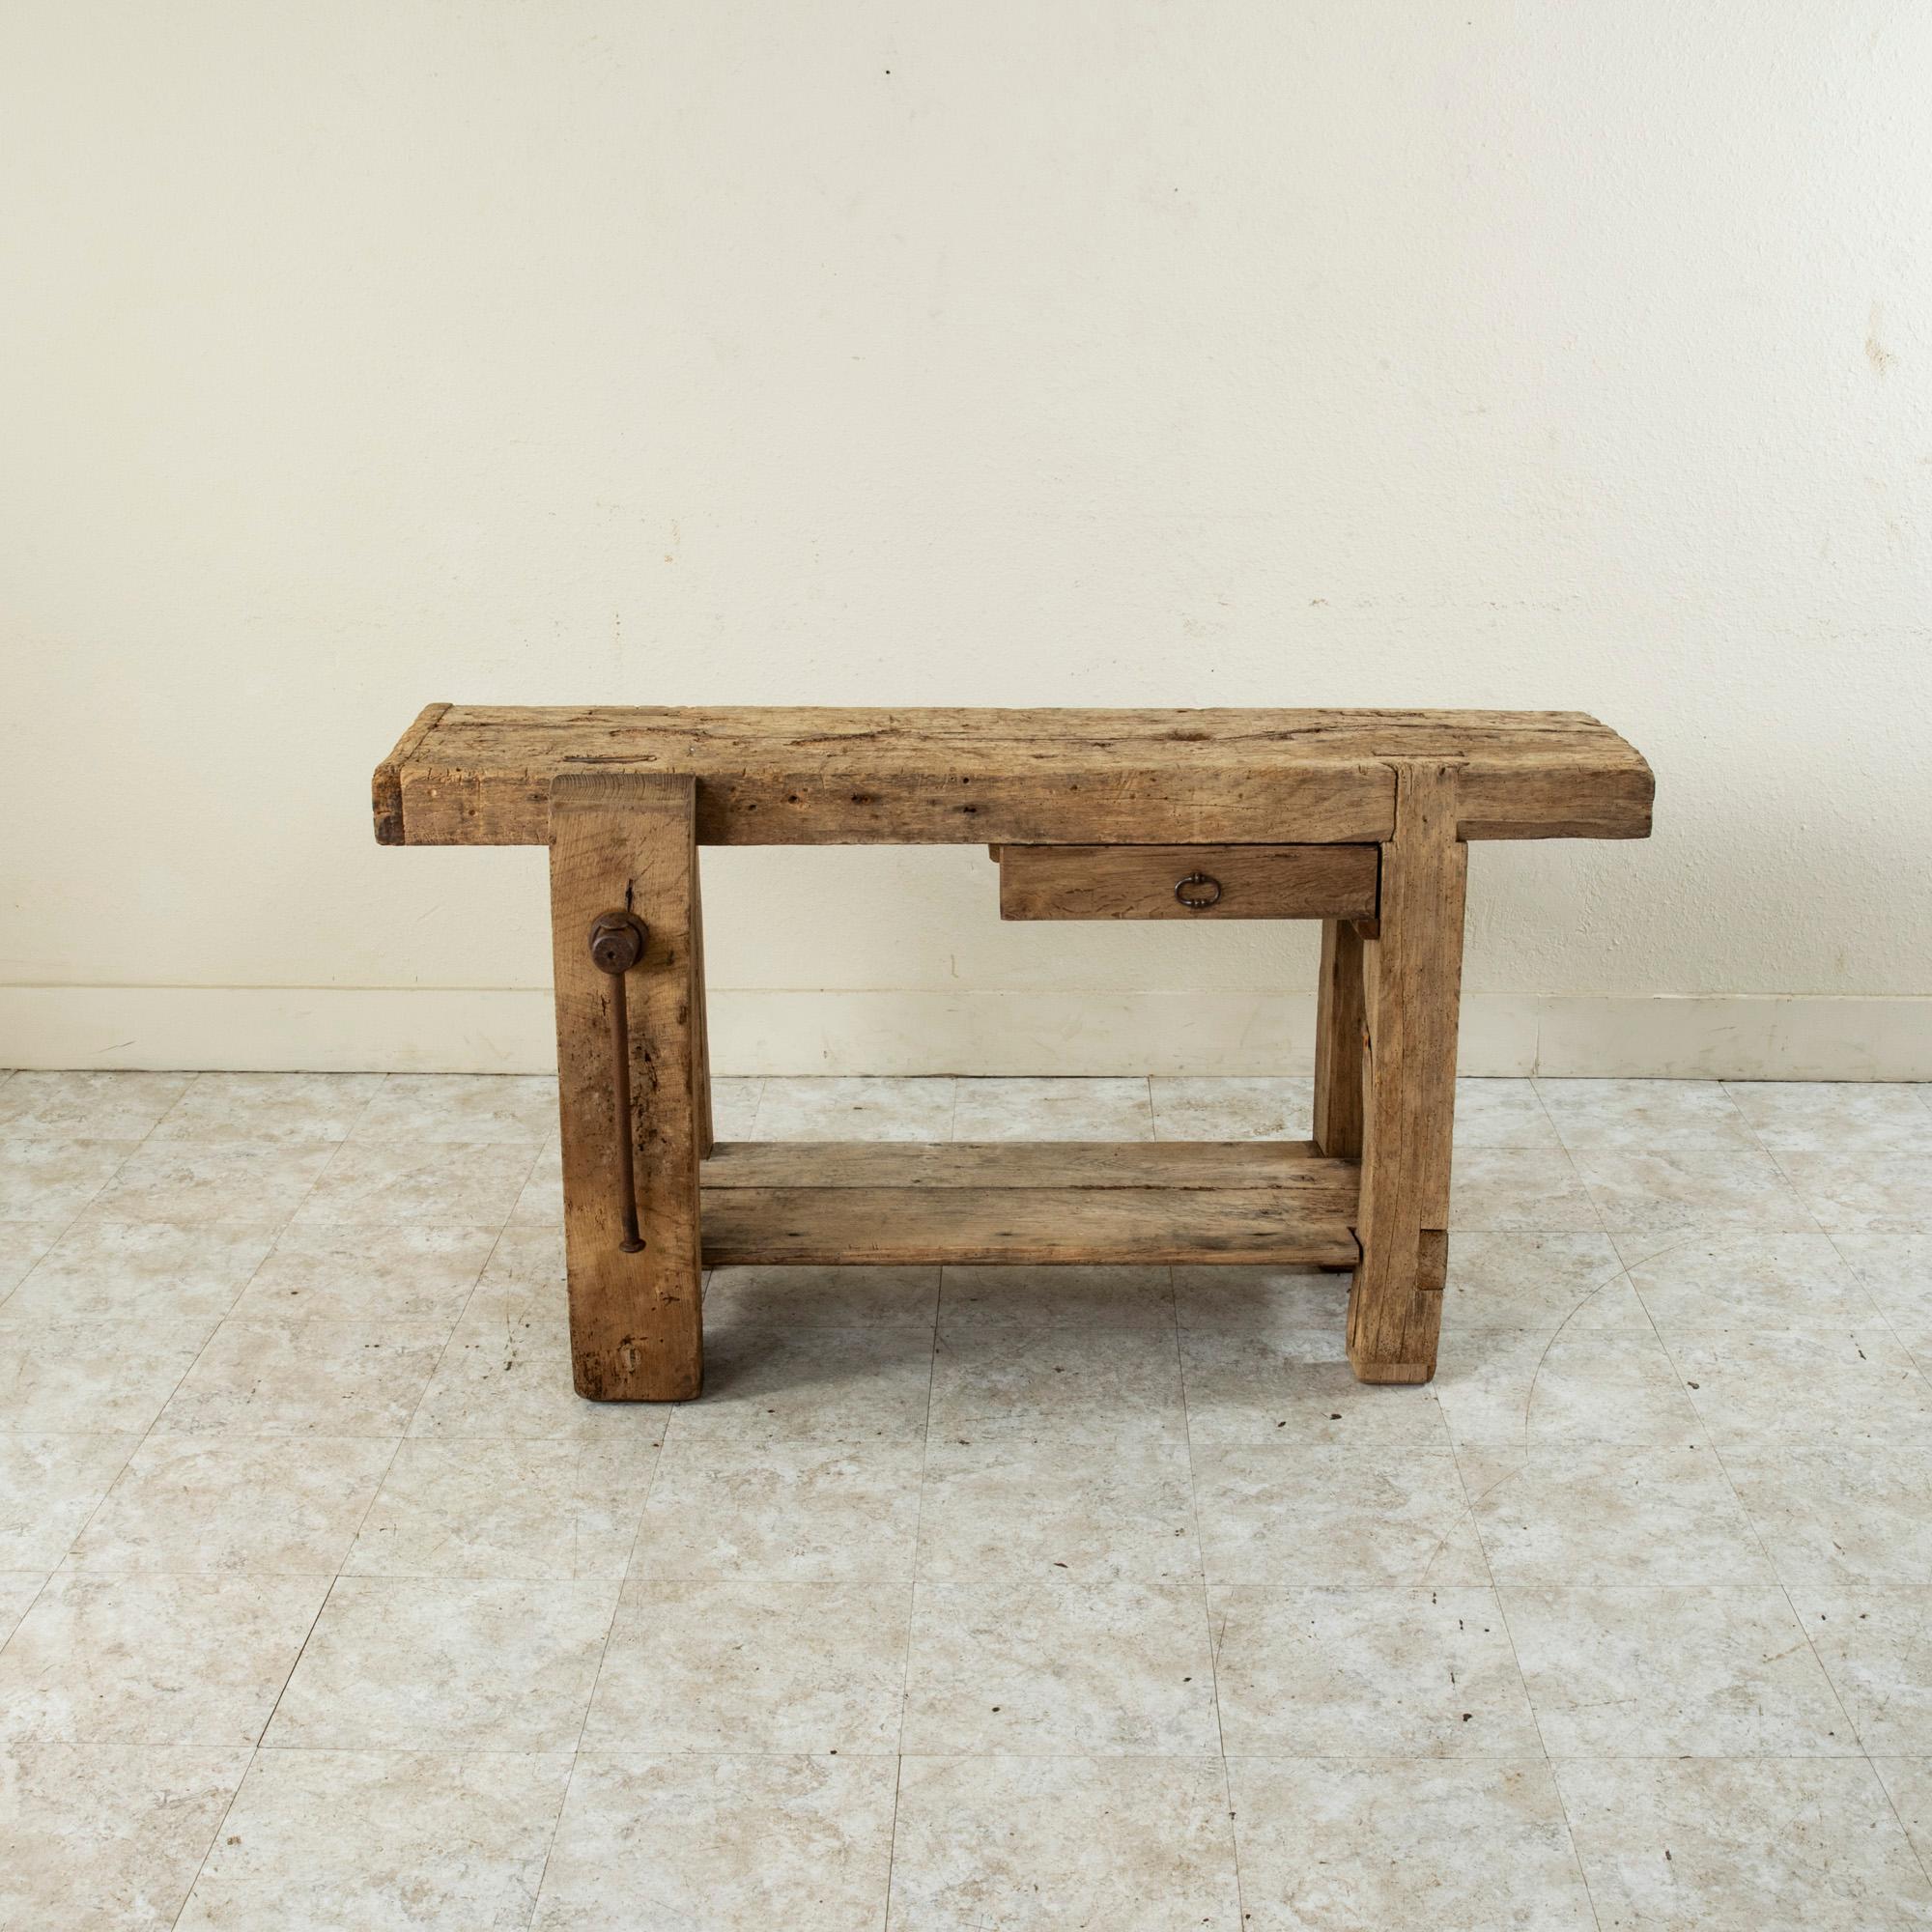 This late nineteenth century French bleached oak workbench features a vise grip on the left side that can be positioned so that a bar towel can be hung from it. A drawer on the right where tools would have been kept now serves as extra storage. The